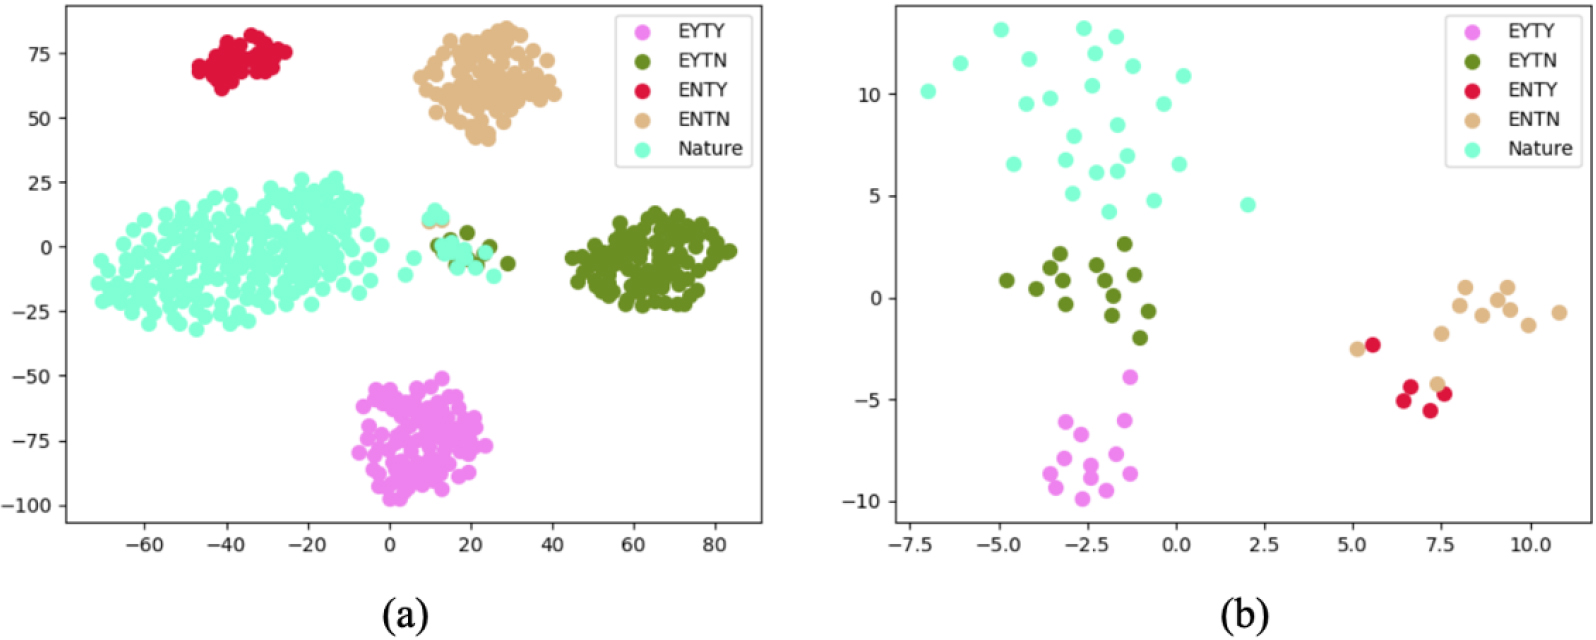 Visualization of learned representations using t-SNE. (a) represents the train set (b) represents the test set. Different colored dots indicate the distribution of features in various categories via deep learning. Features within the same category are relatively proximate, while those in different categories have a certain distance.